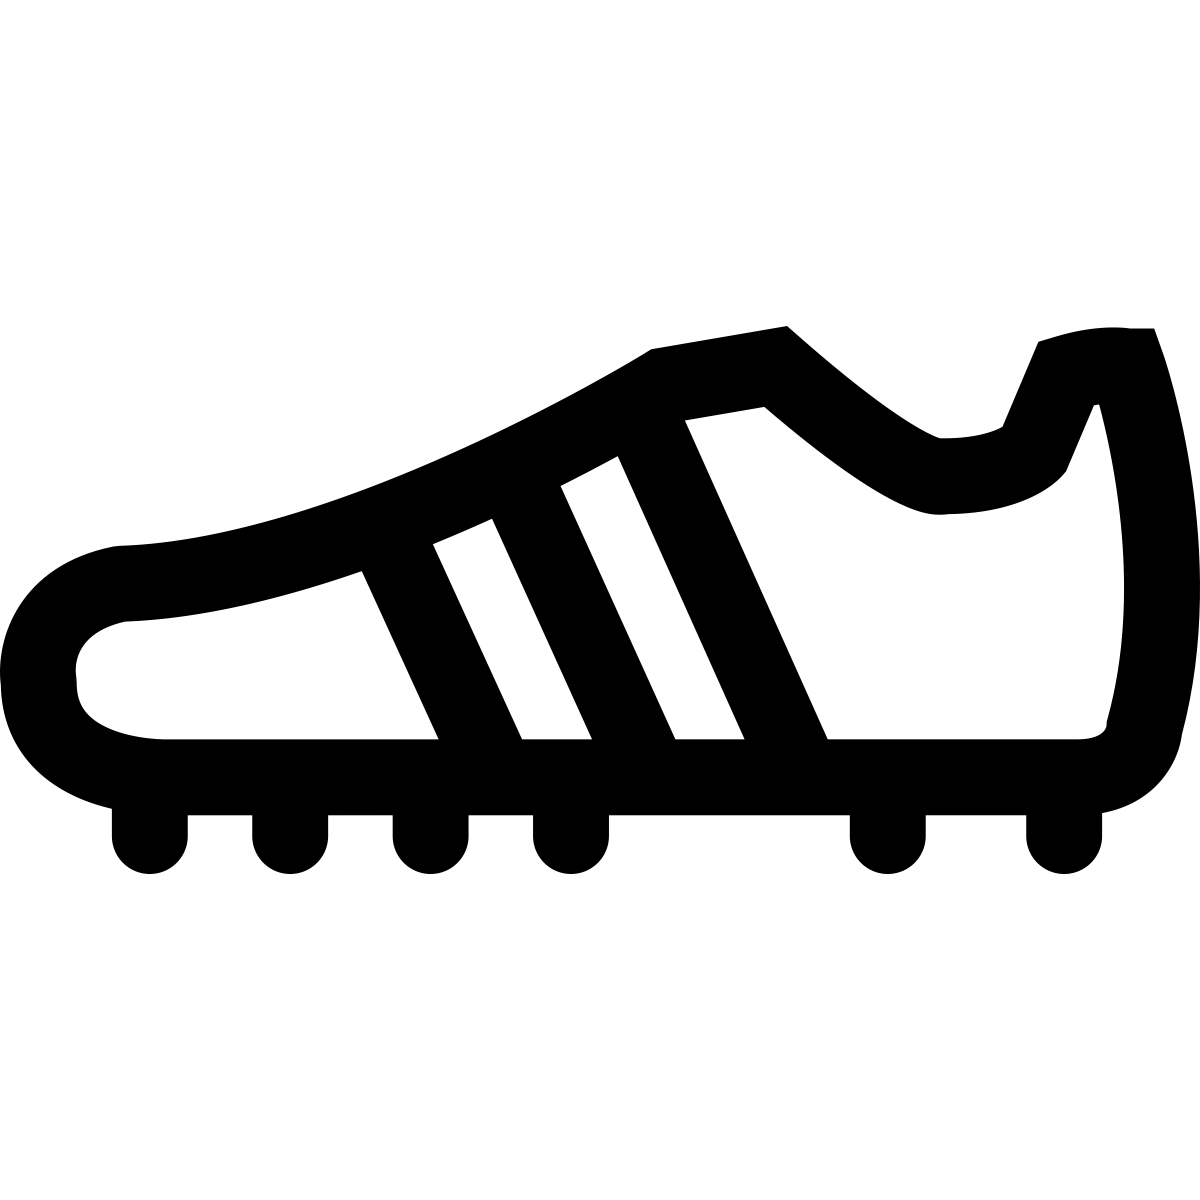 Cleats Logo - Want A Cleat Reviewed? - The Best Soccer Cleats